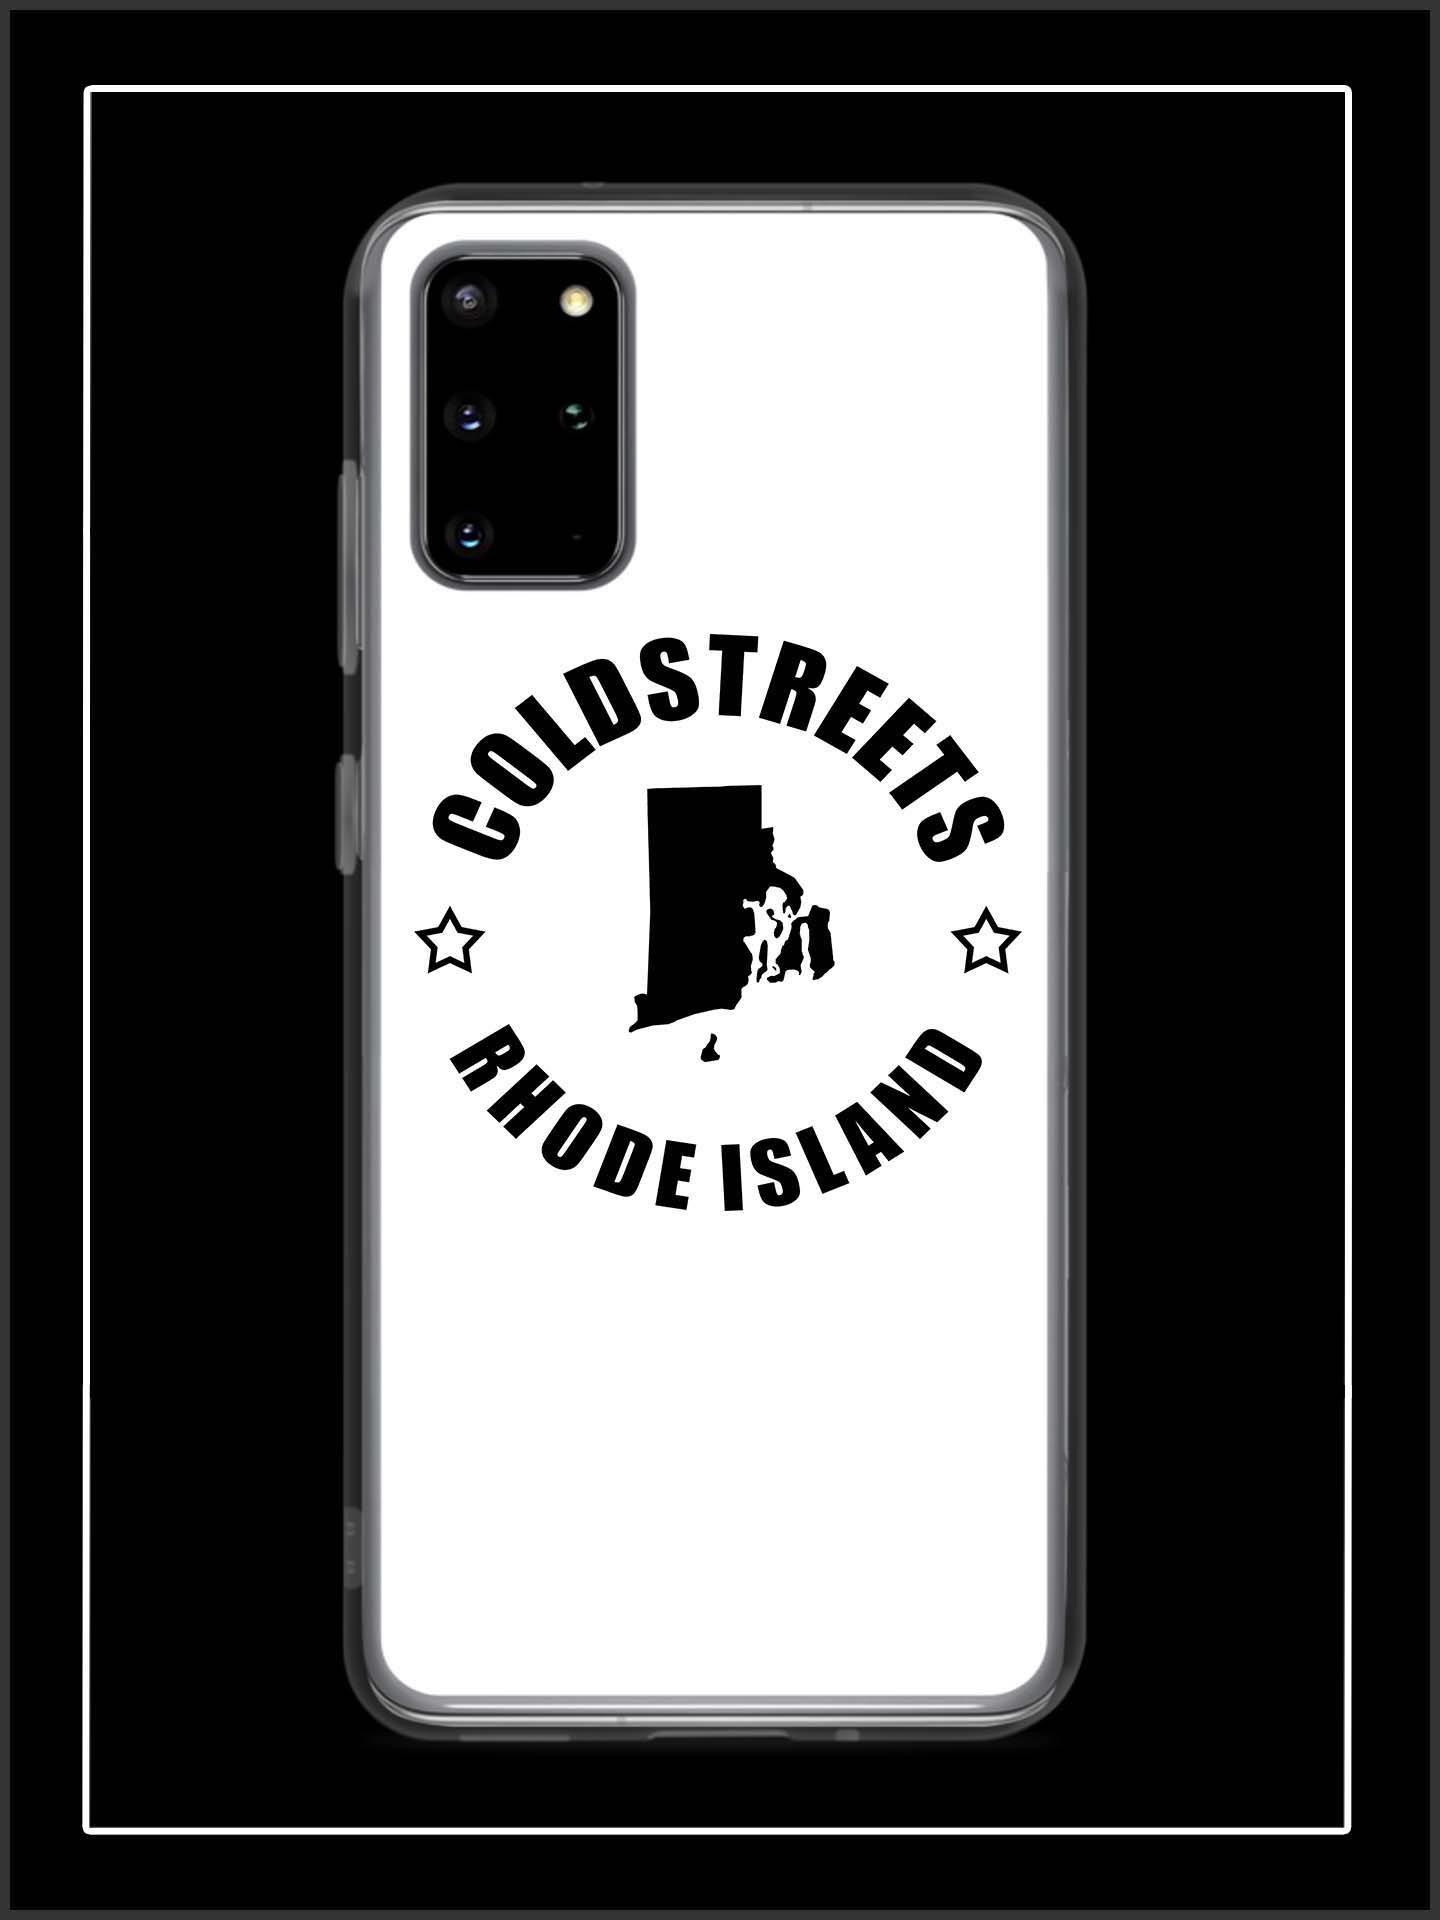 Cold Streets Rhode Island Samsung Cases